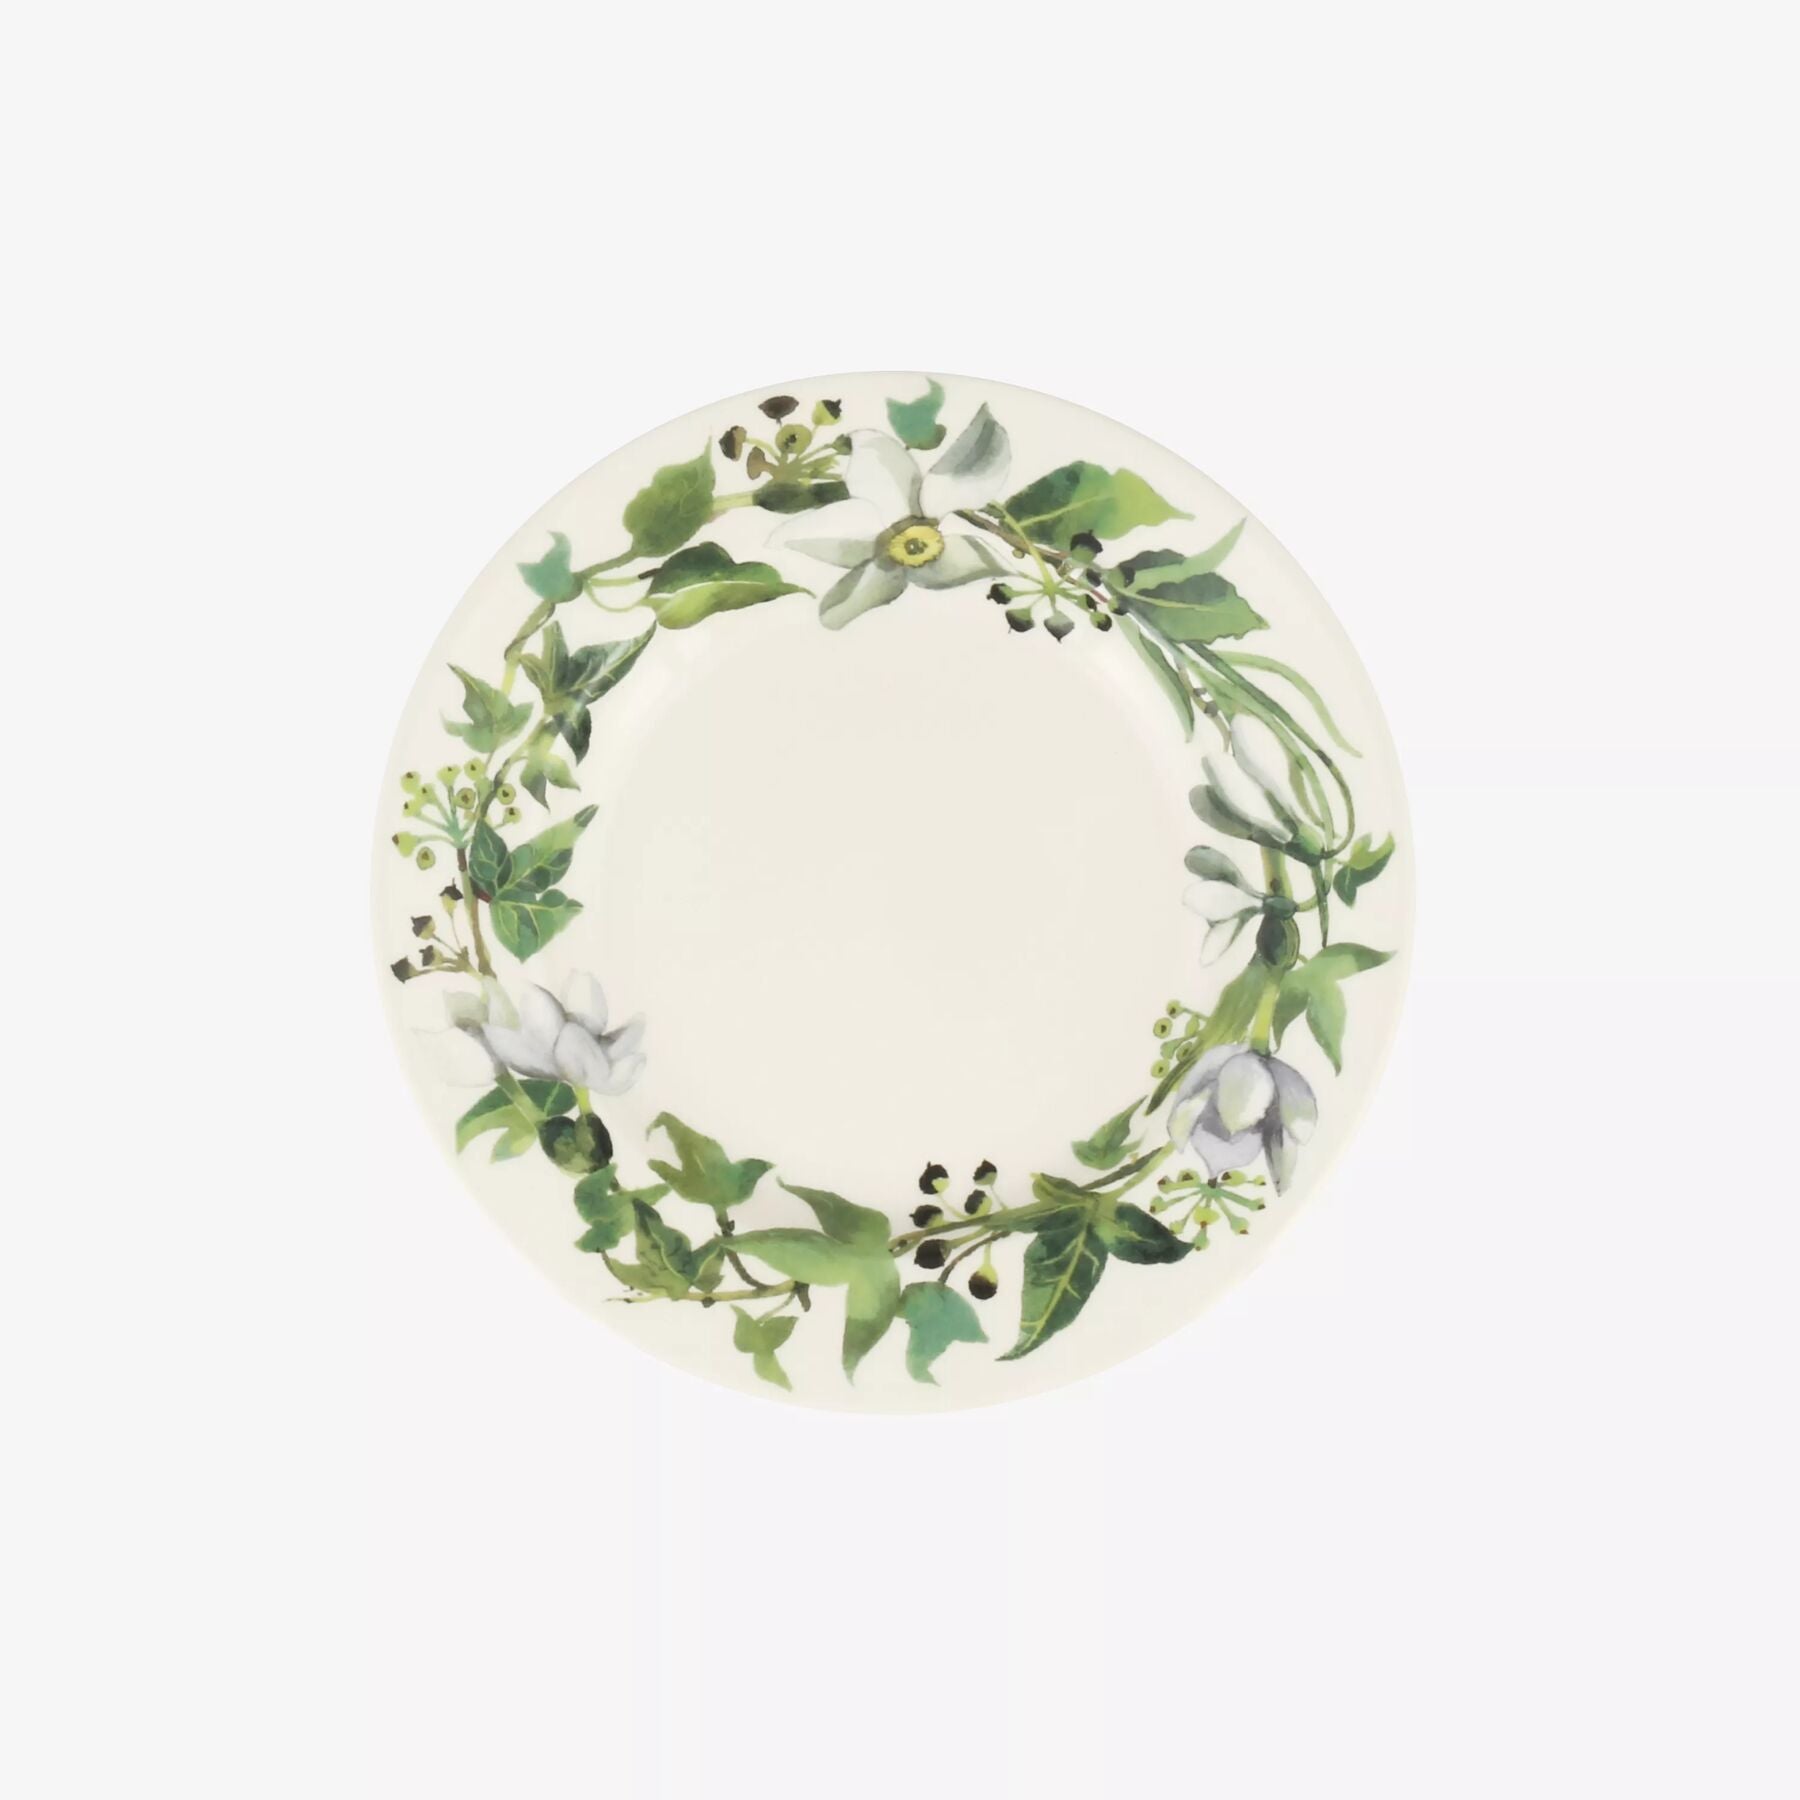 Seconds Ivy 6 1/2 Inch Plate - Unique Handmade & Handpainted English Earthenware British-Made Potter